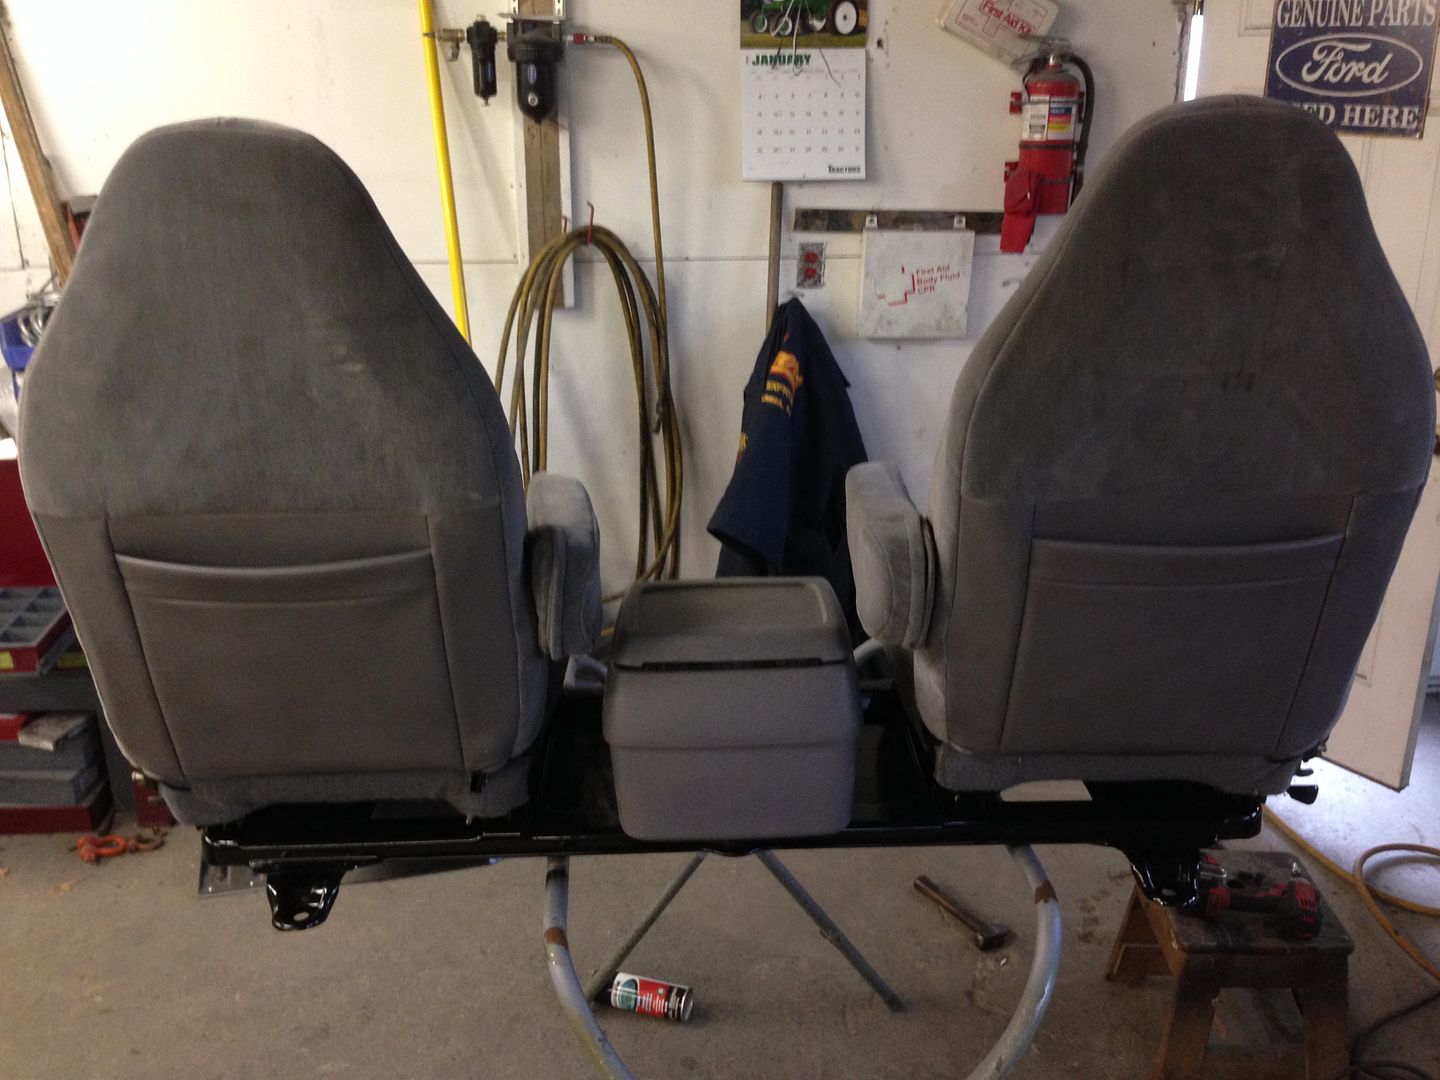 New Here! 1988 F-250 Bench Seat - Ford Truck Enthusiasts Forums